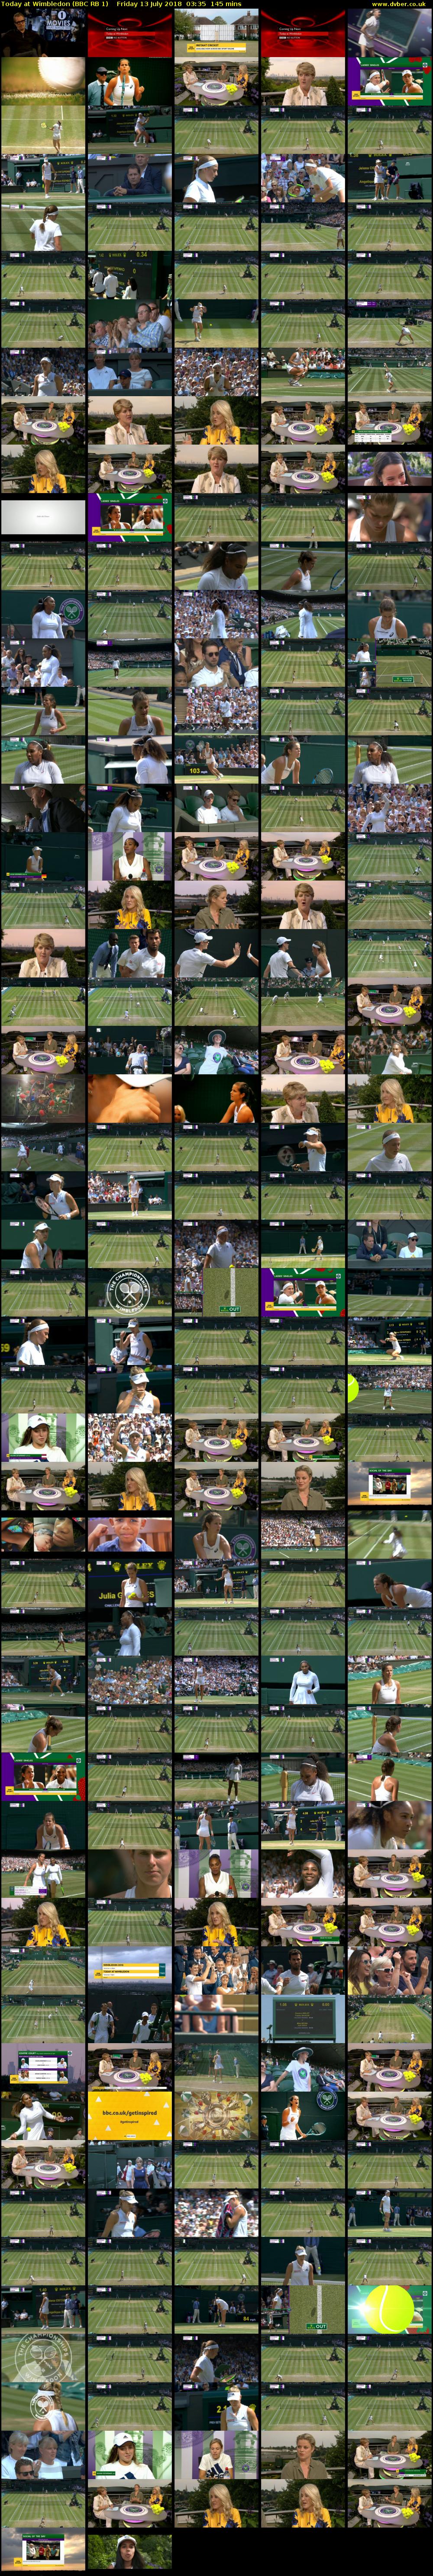 Today at Wimbledon (BBC RB 1) Friday 13 July 2018 03:35 - 06:00